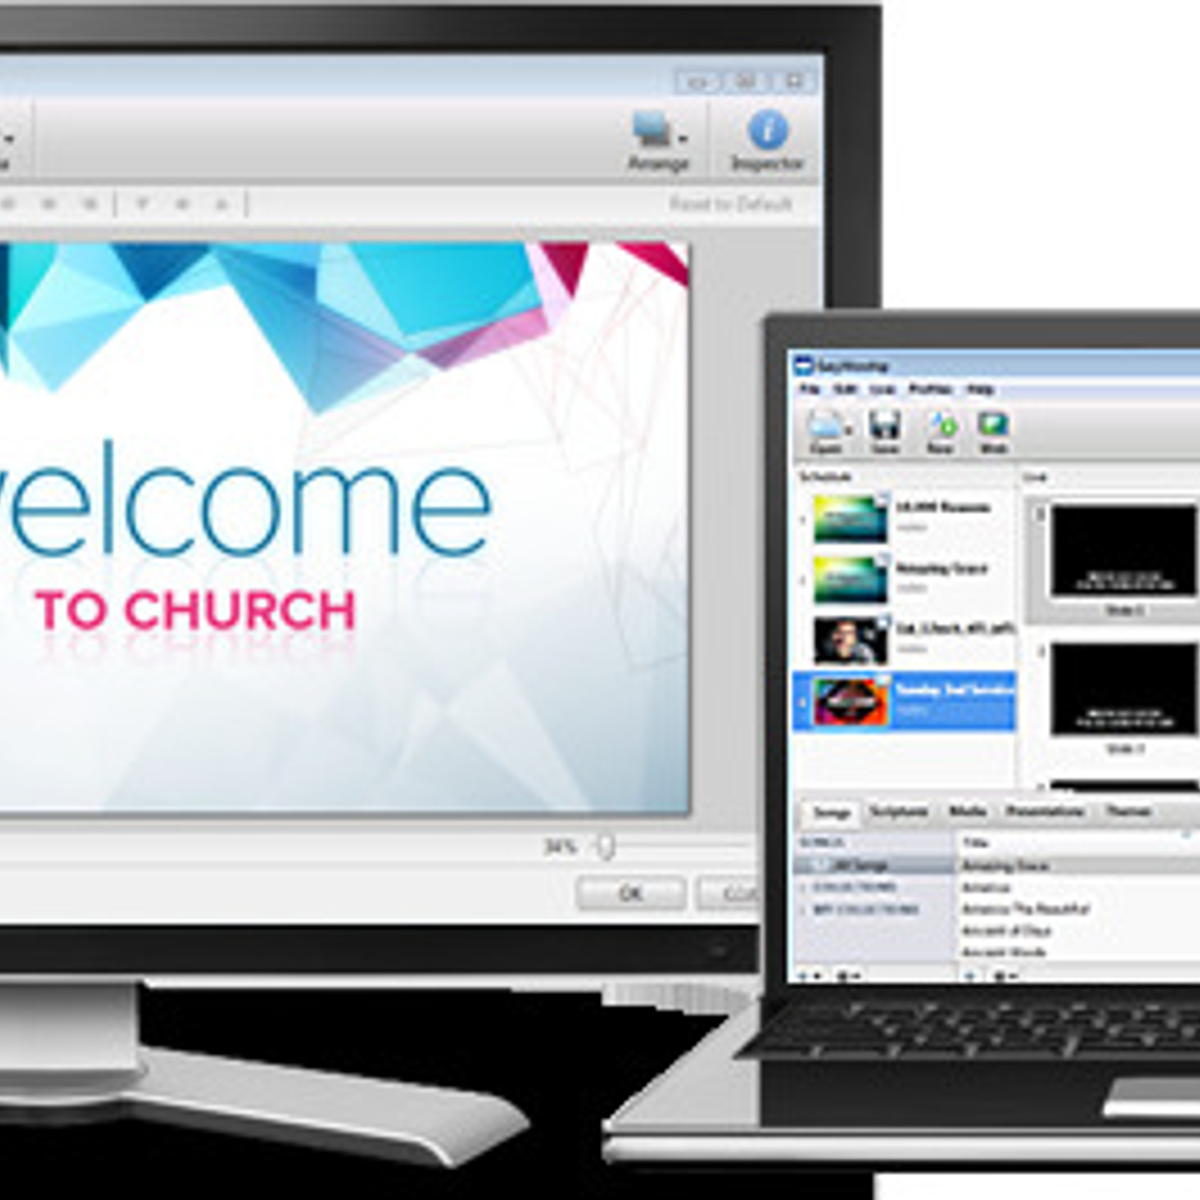 easy worship software free download for mac